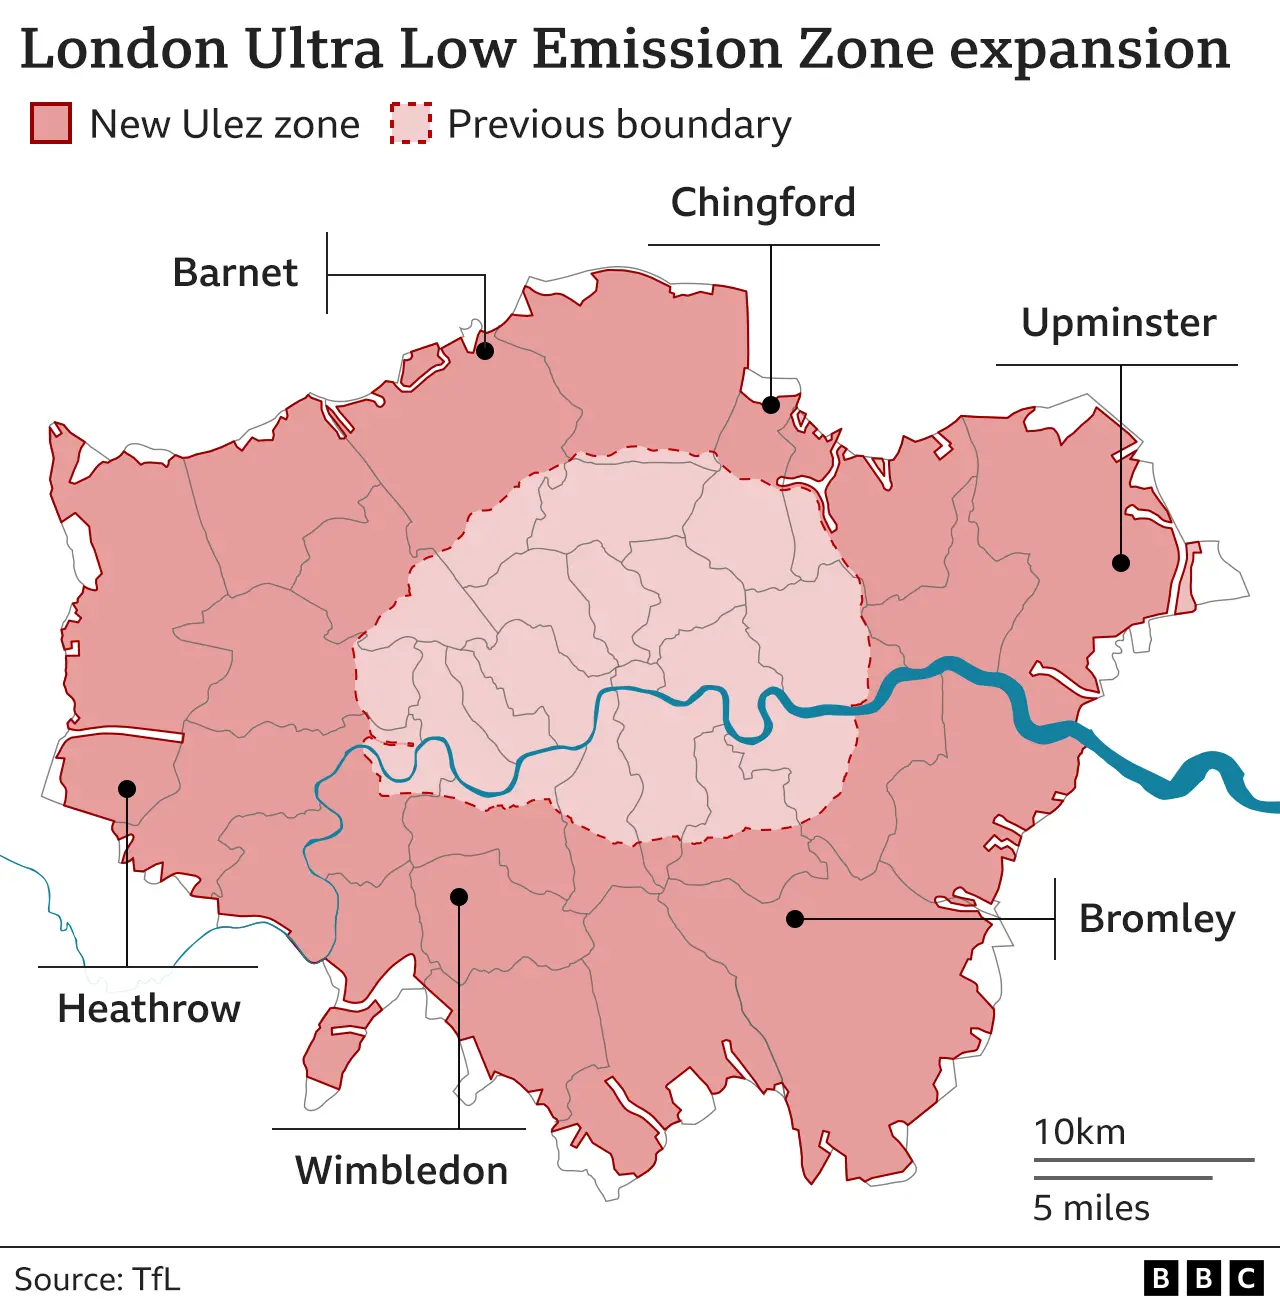 Ulez expanded to include whole of outer London